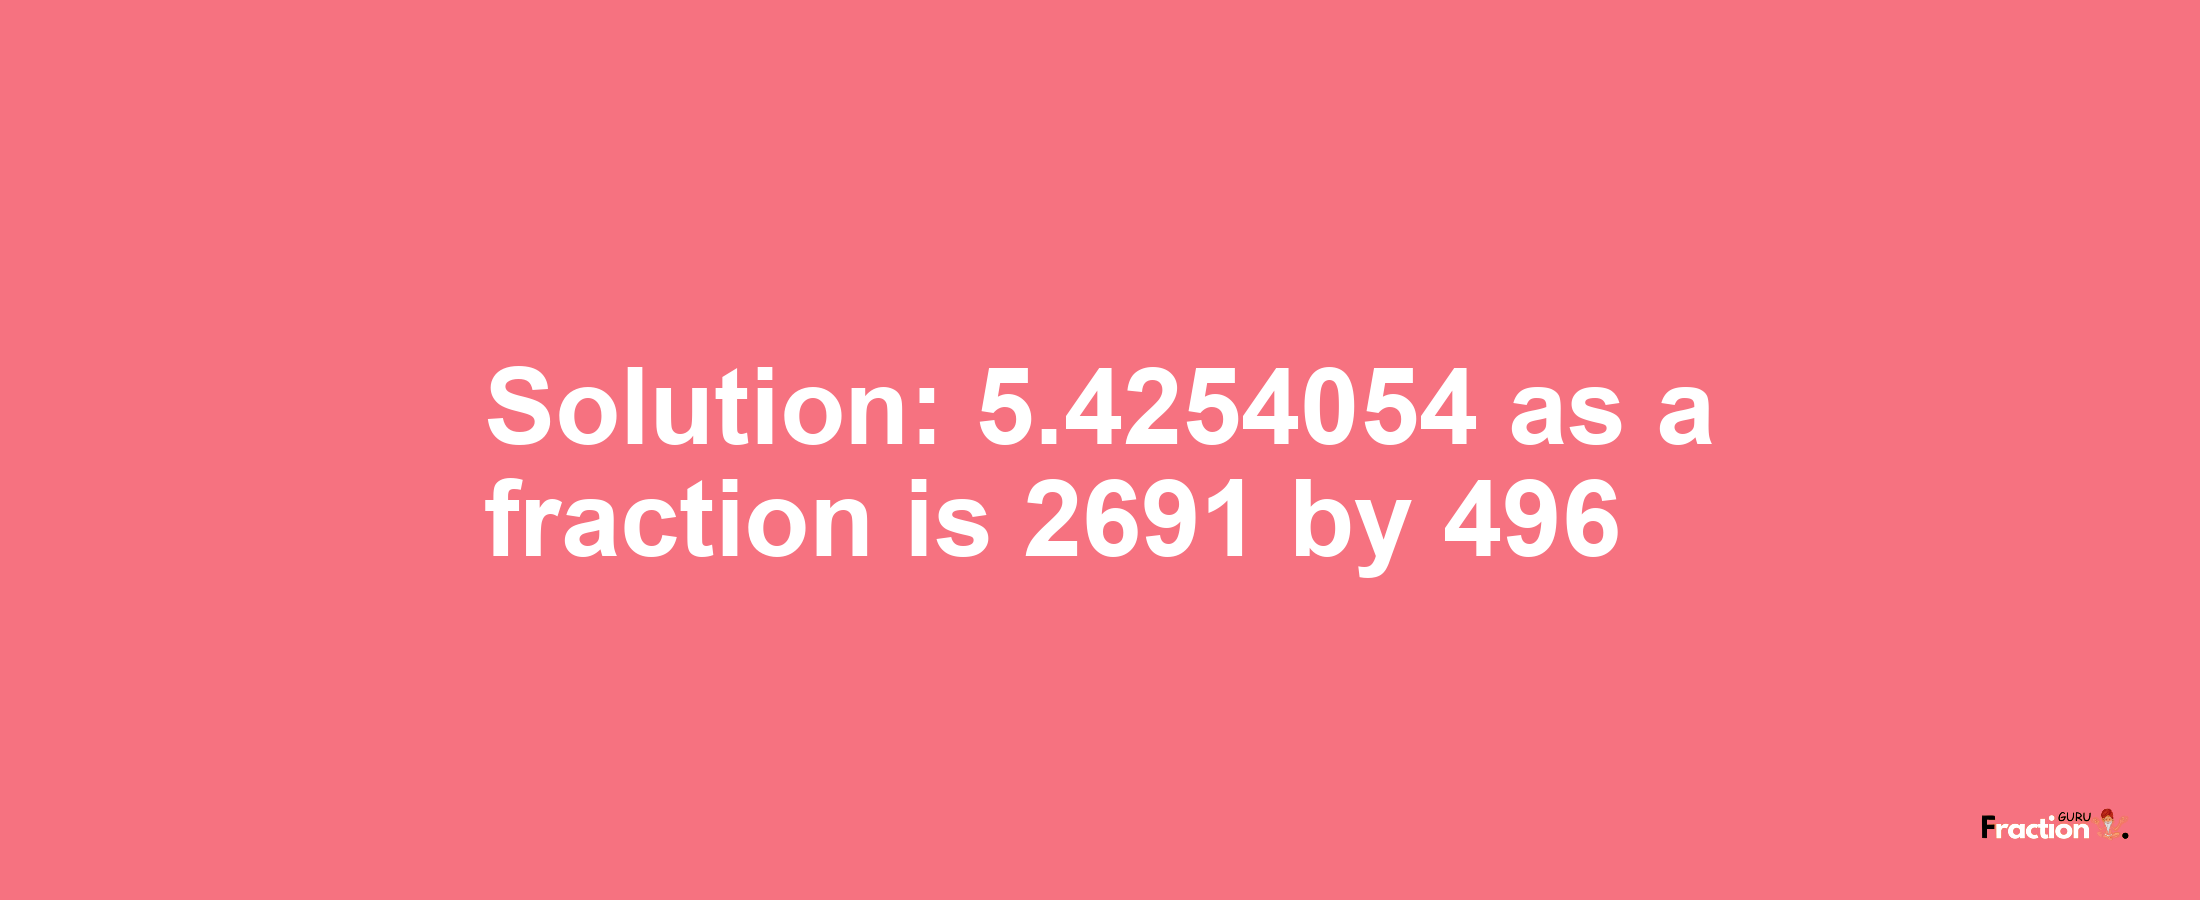 Solution:5.4254054 as a fraction is 2691/496